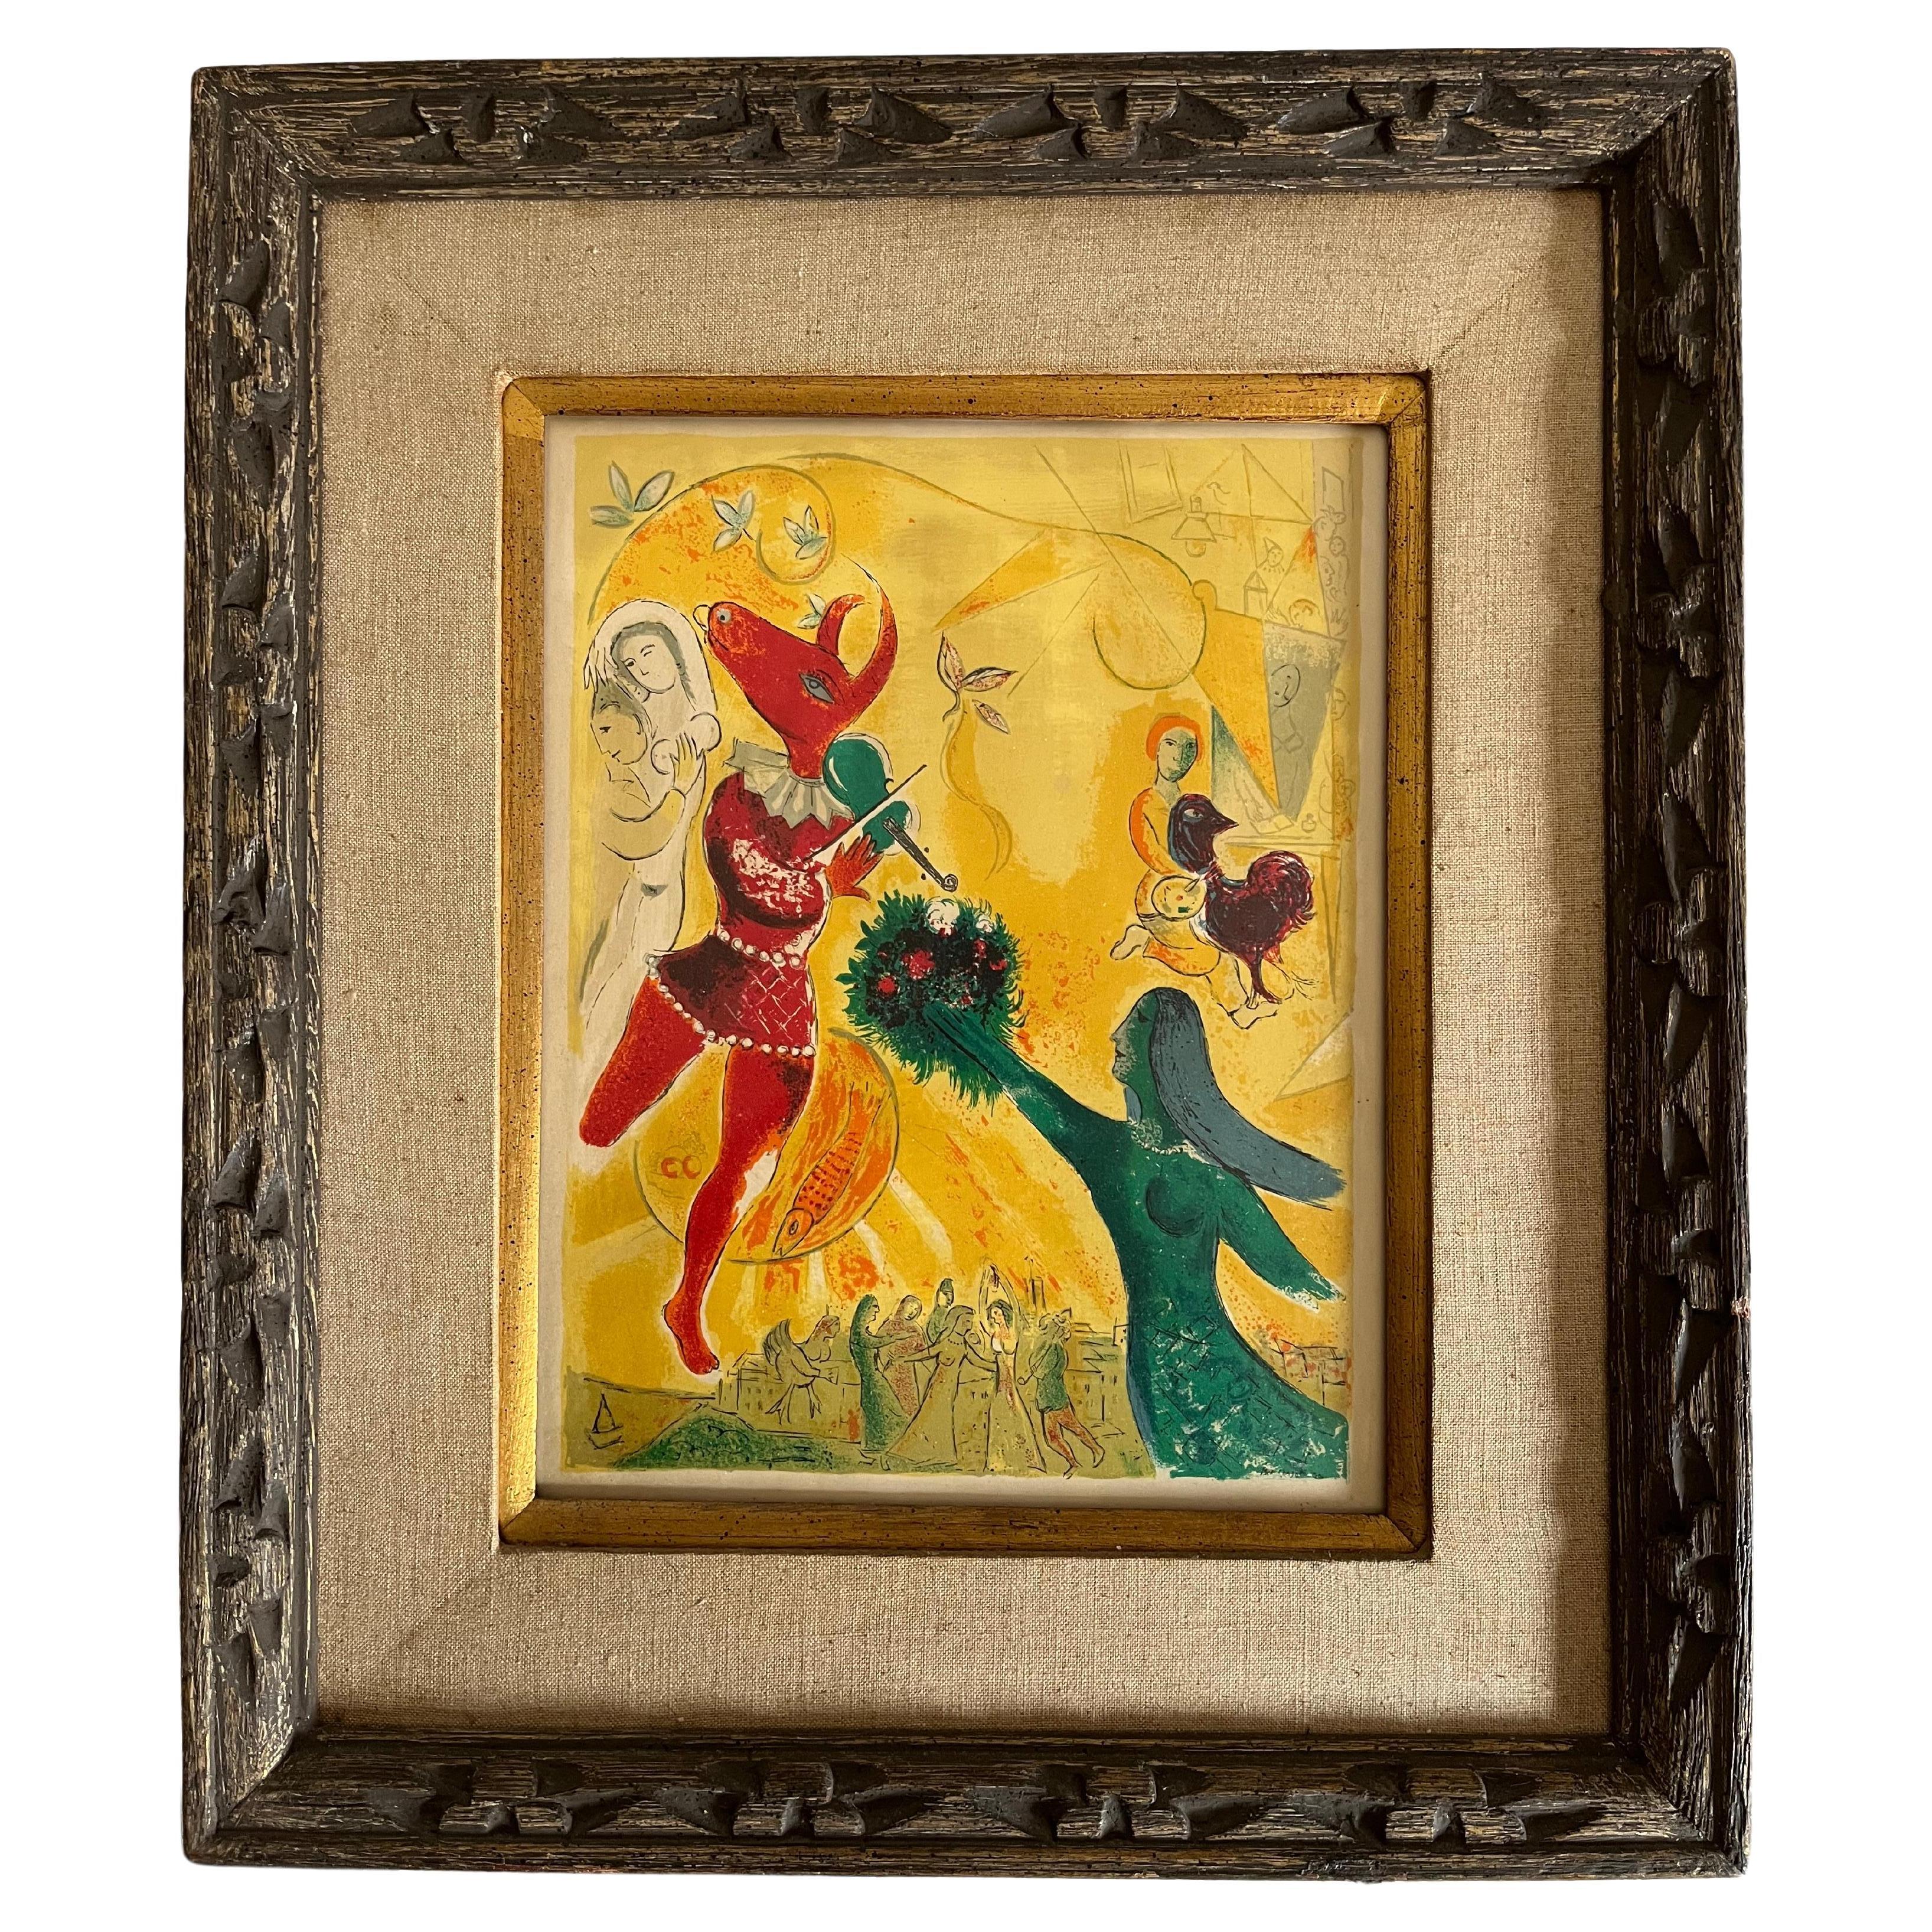 Marc Chagall “The Dance” 1950 Litho For Sale